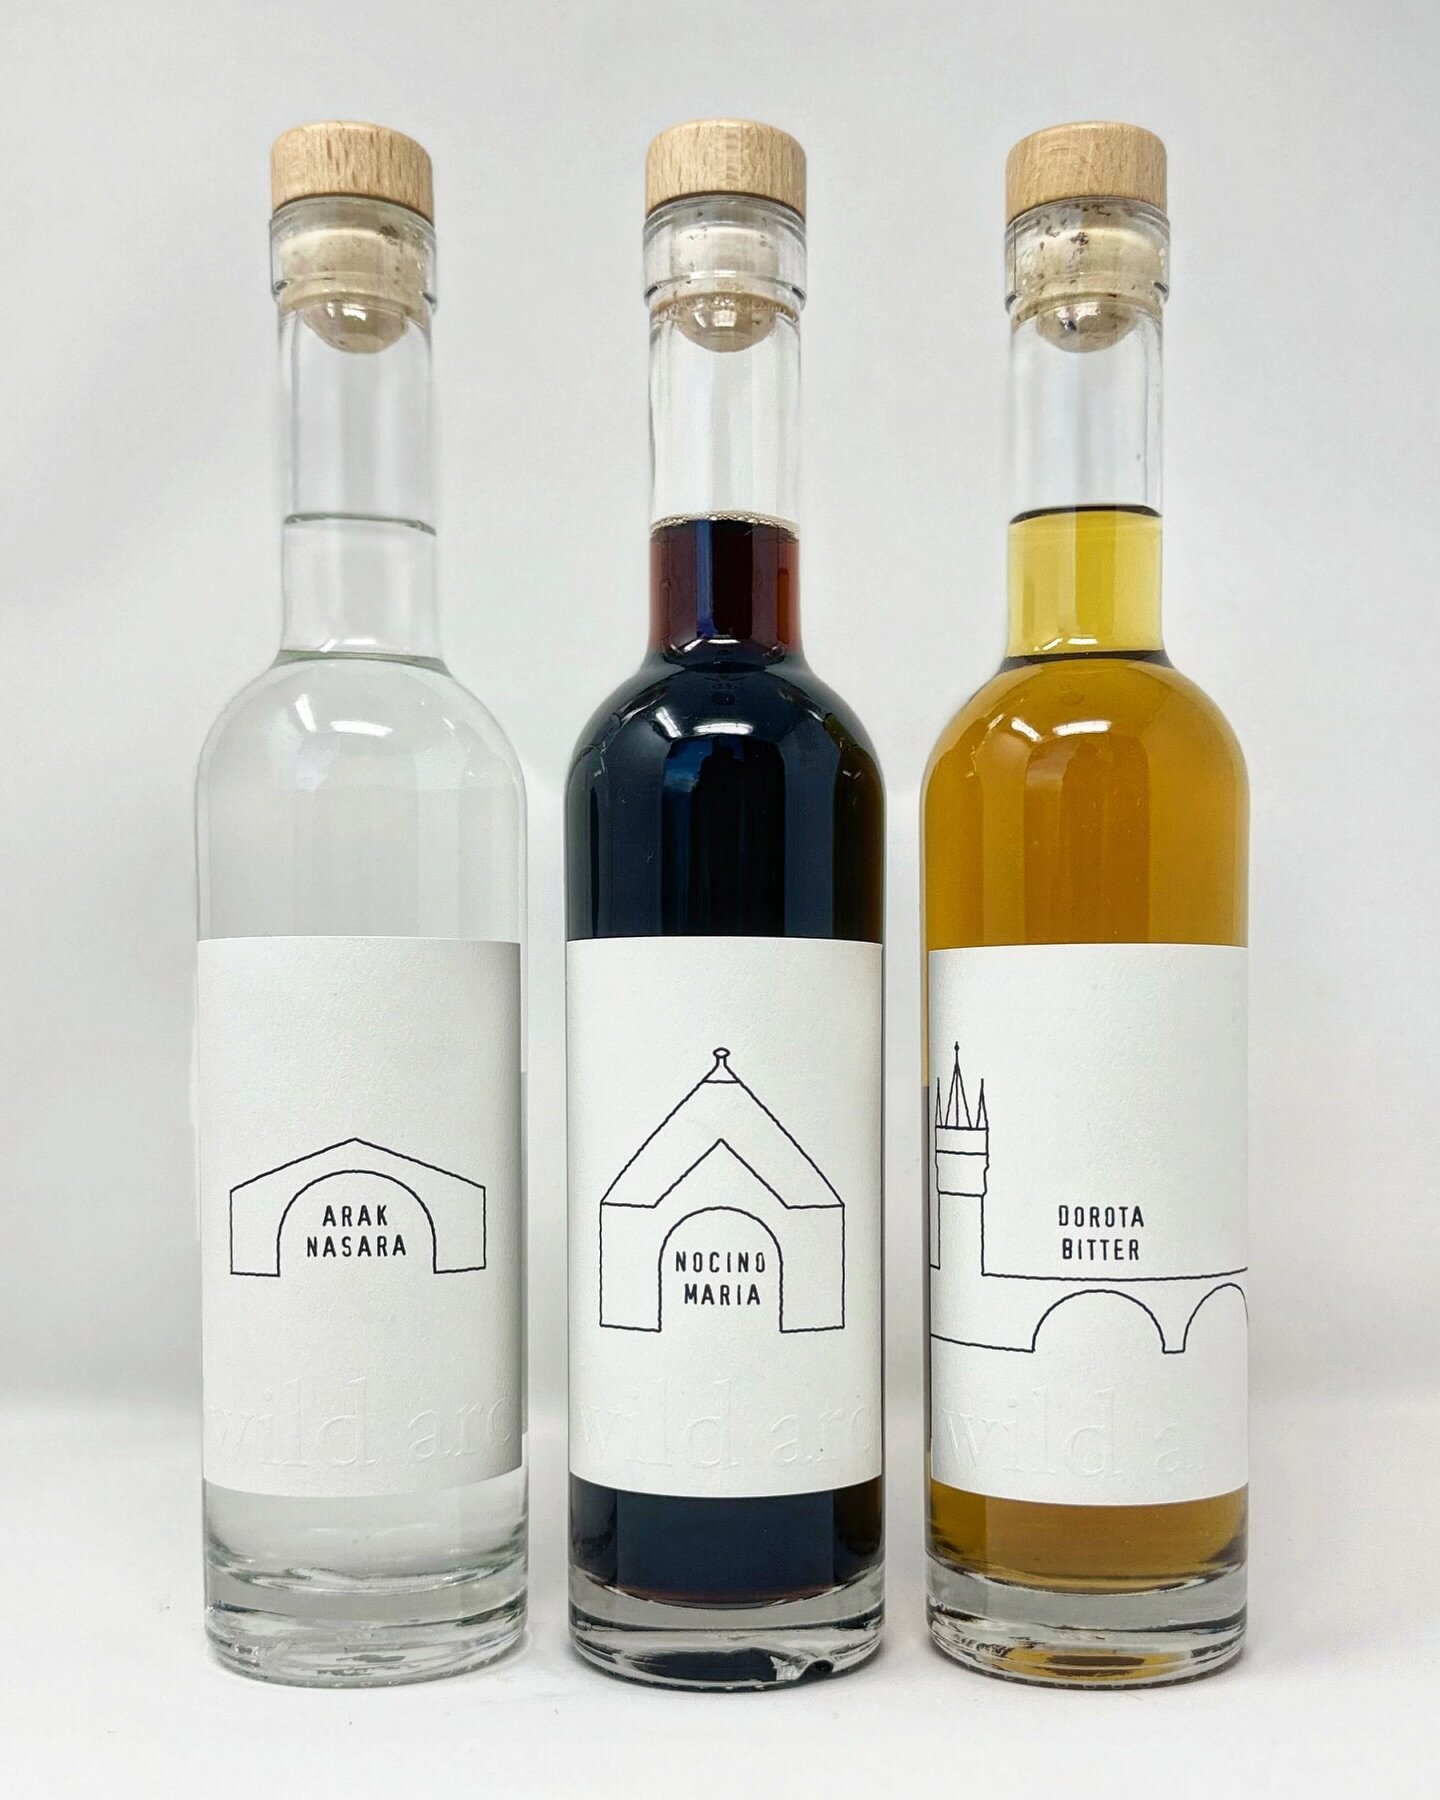 After a long wait, we are finally ready to release our expanded spirits collection, just in time for the holidays. The spirits have always represented both our connection to the land here at Wild Arc Farm, and the connection to our heritage. We have 